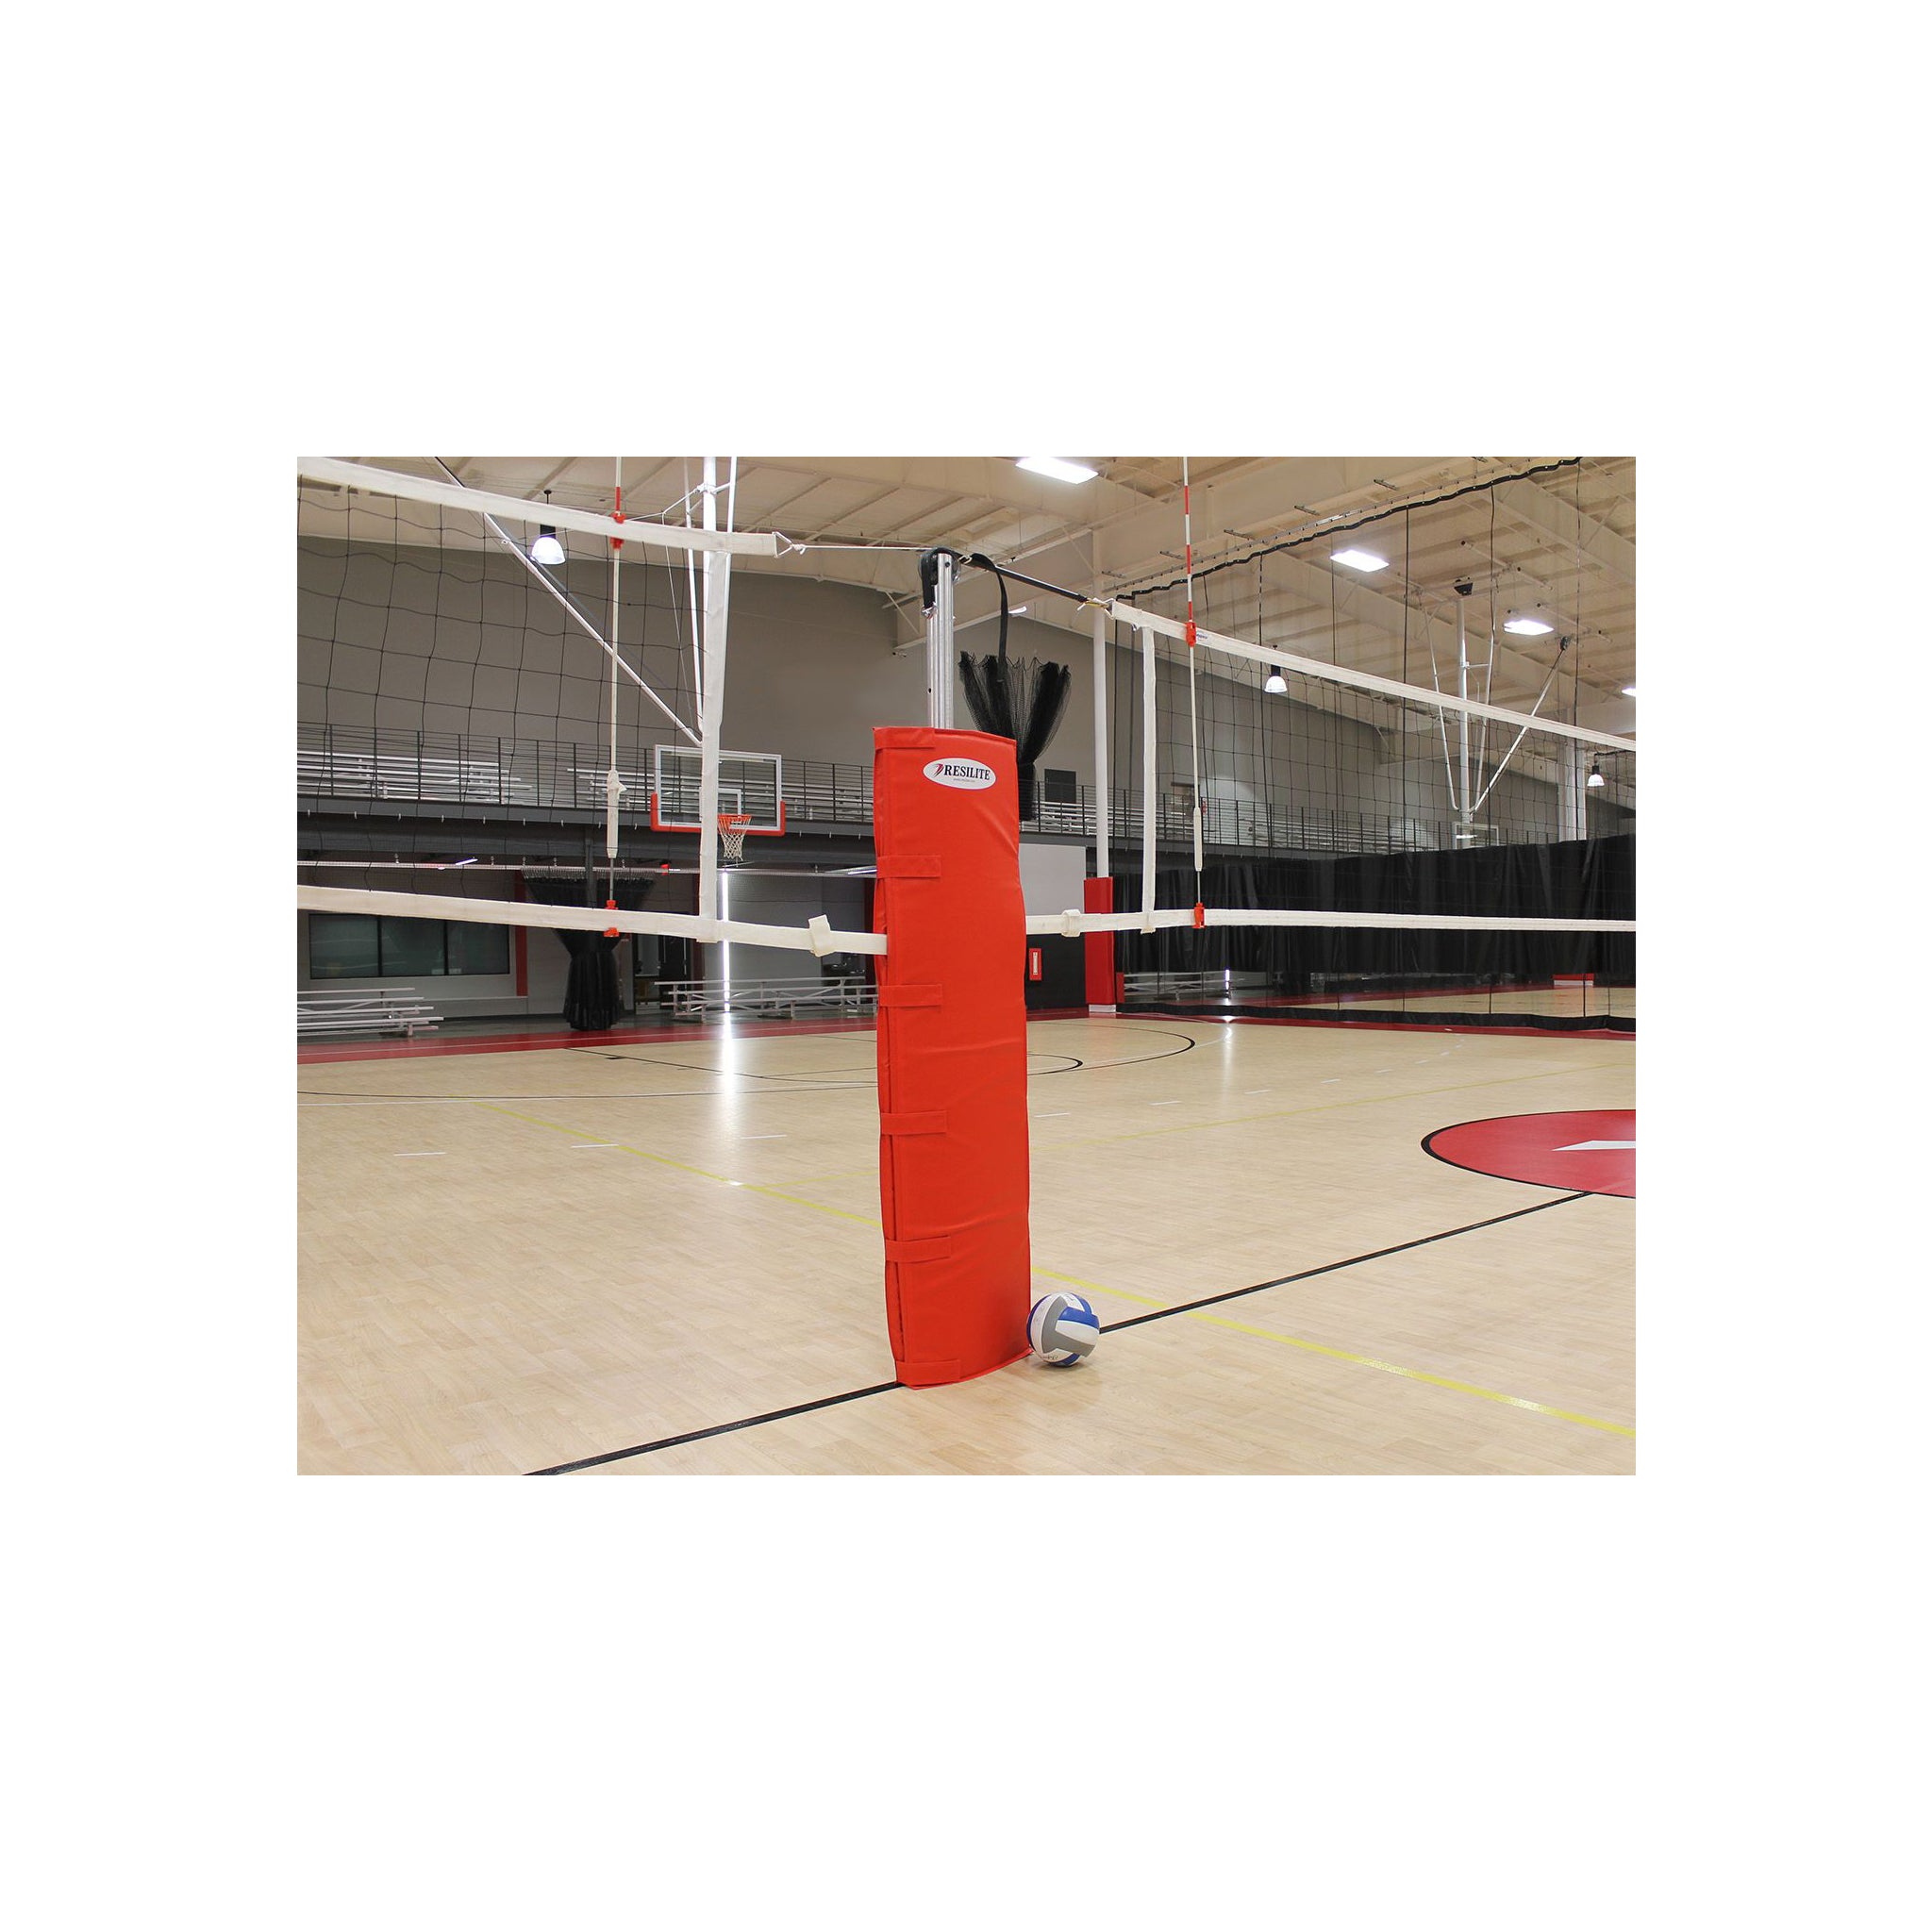 Volley ball Center Post Pads